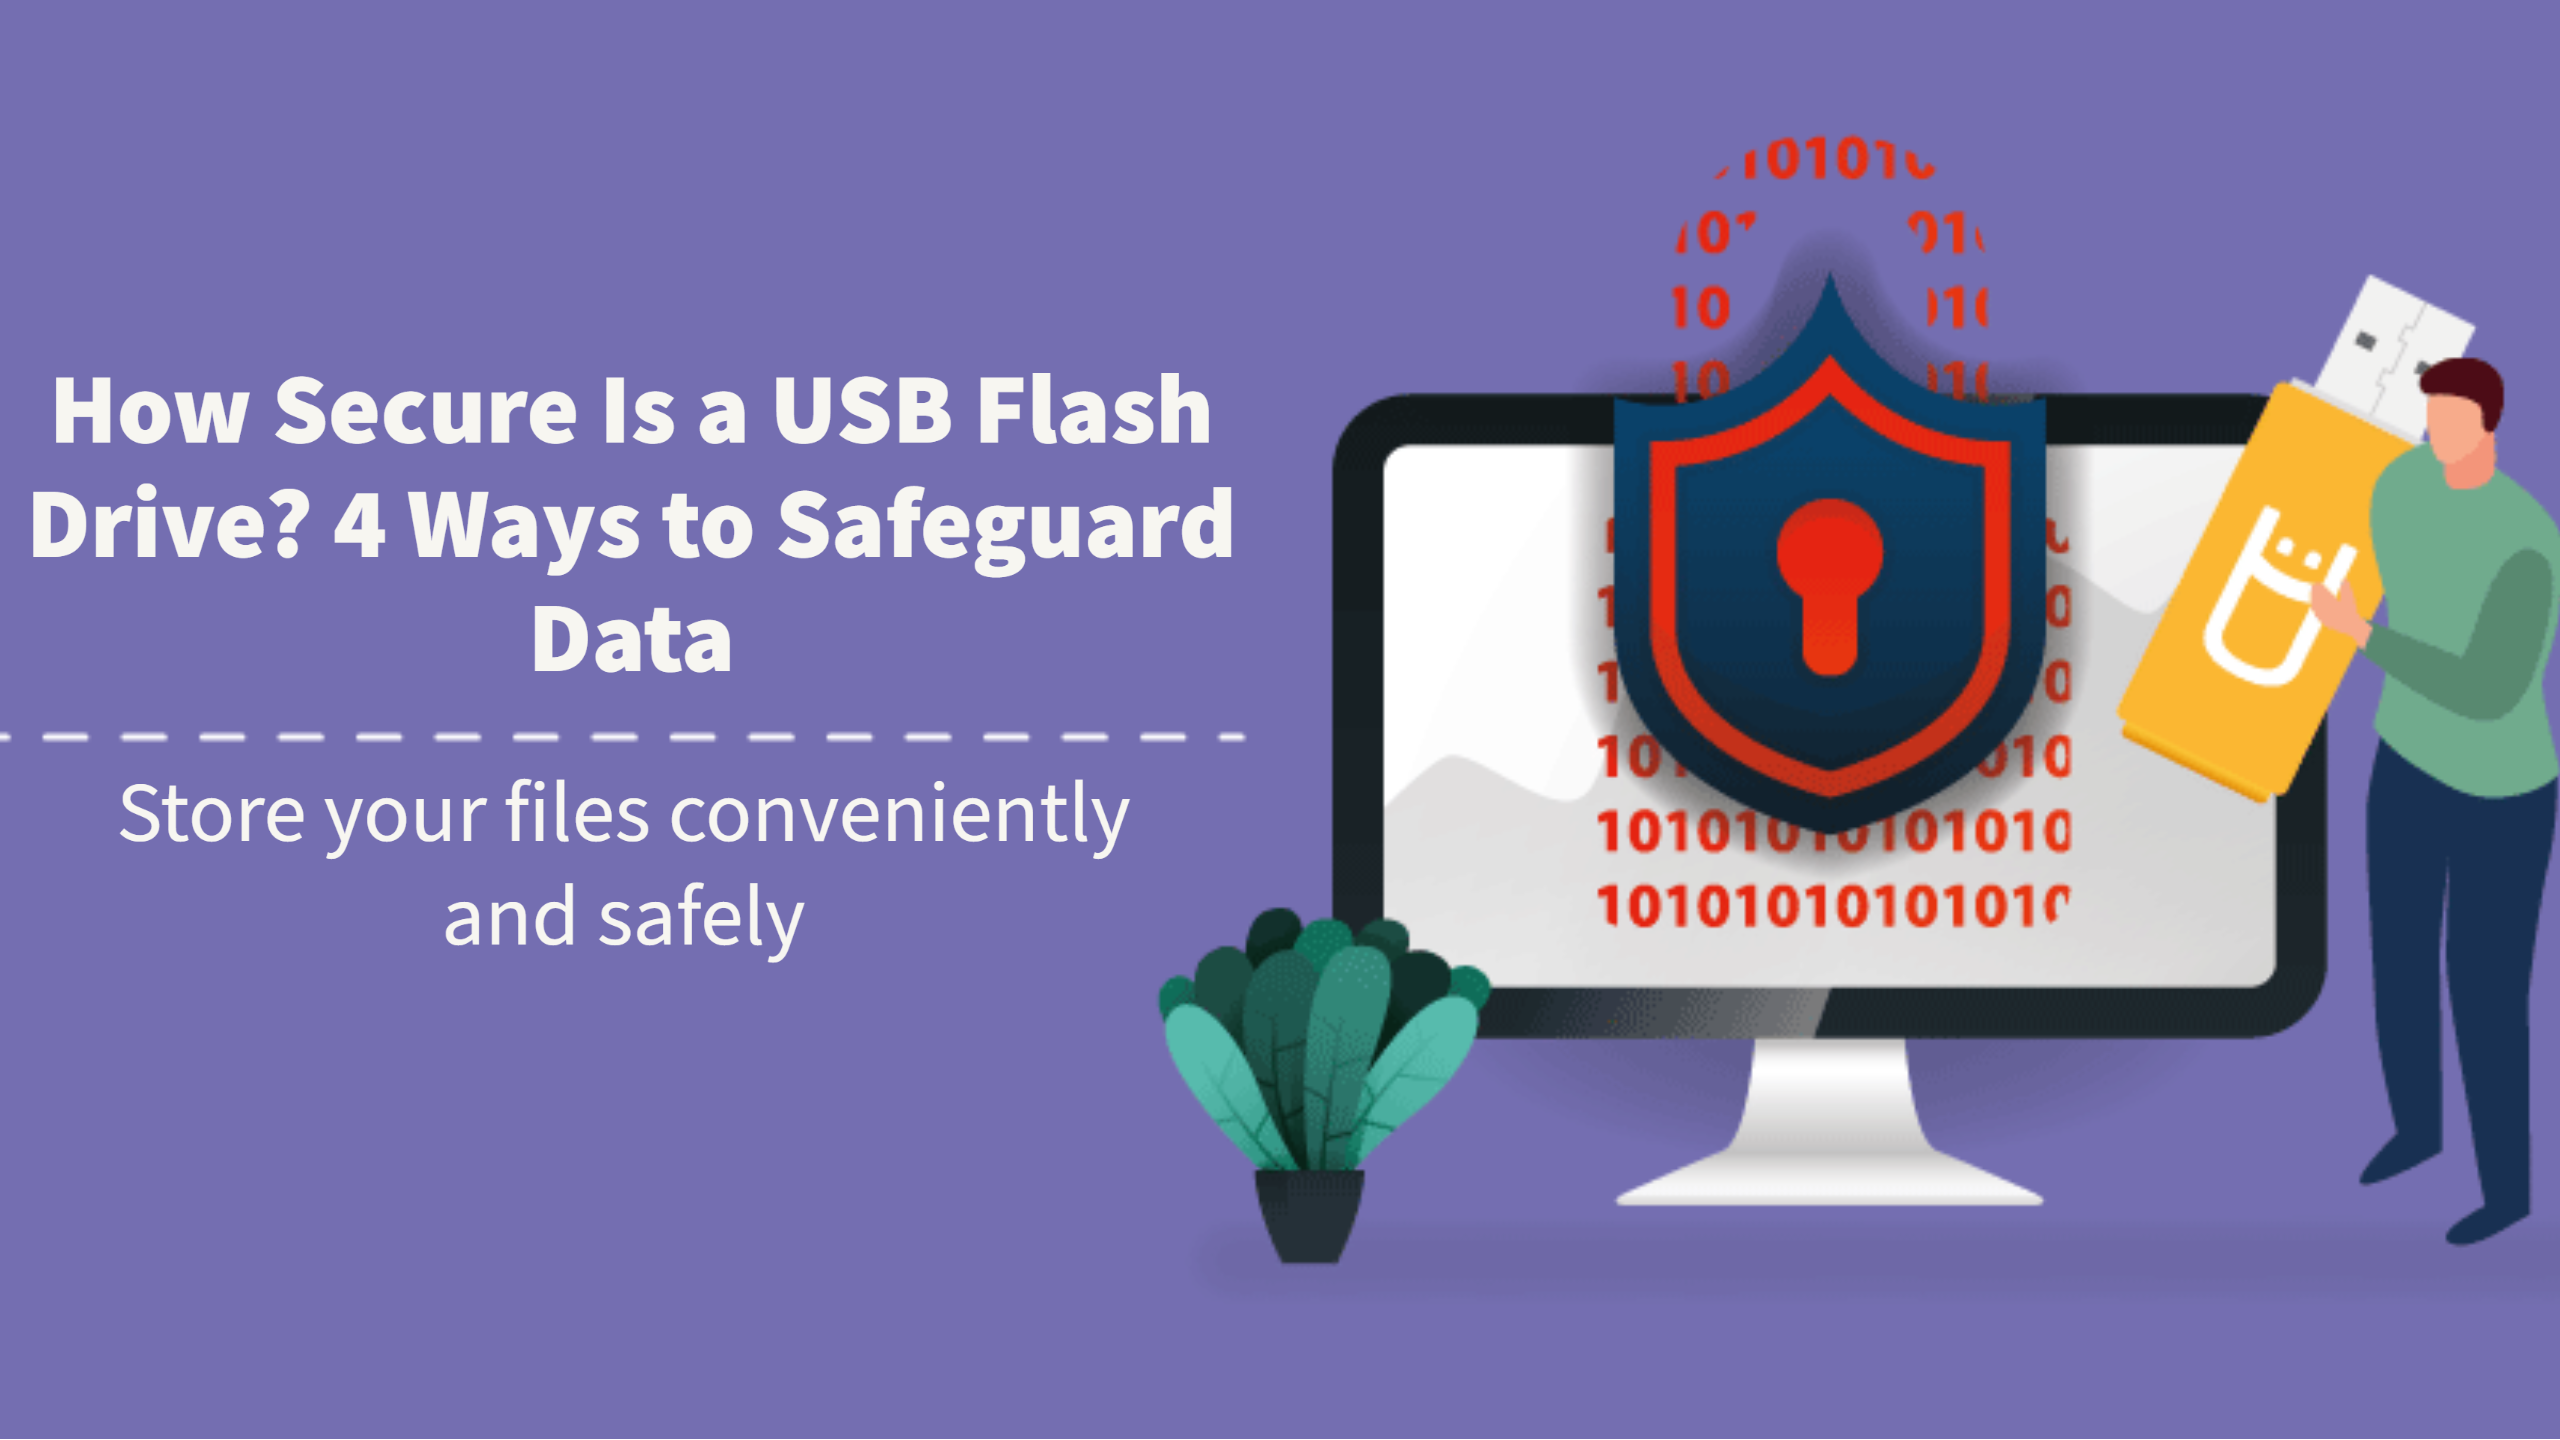 How Secure Is a USB Flash Drive? 4 Ways to Safeguard Data